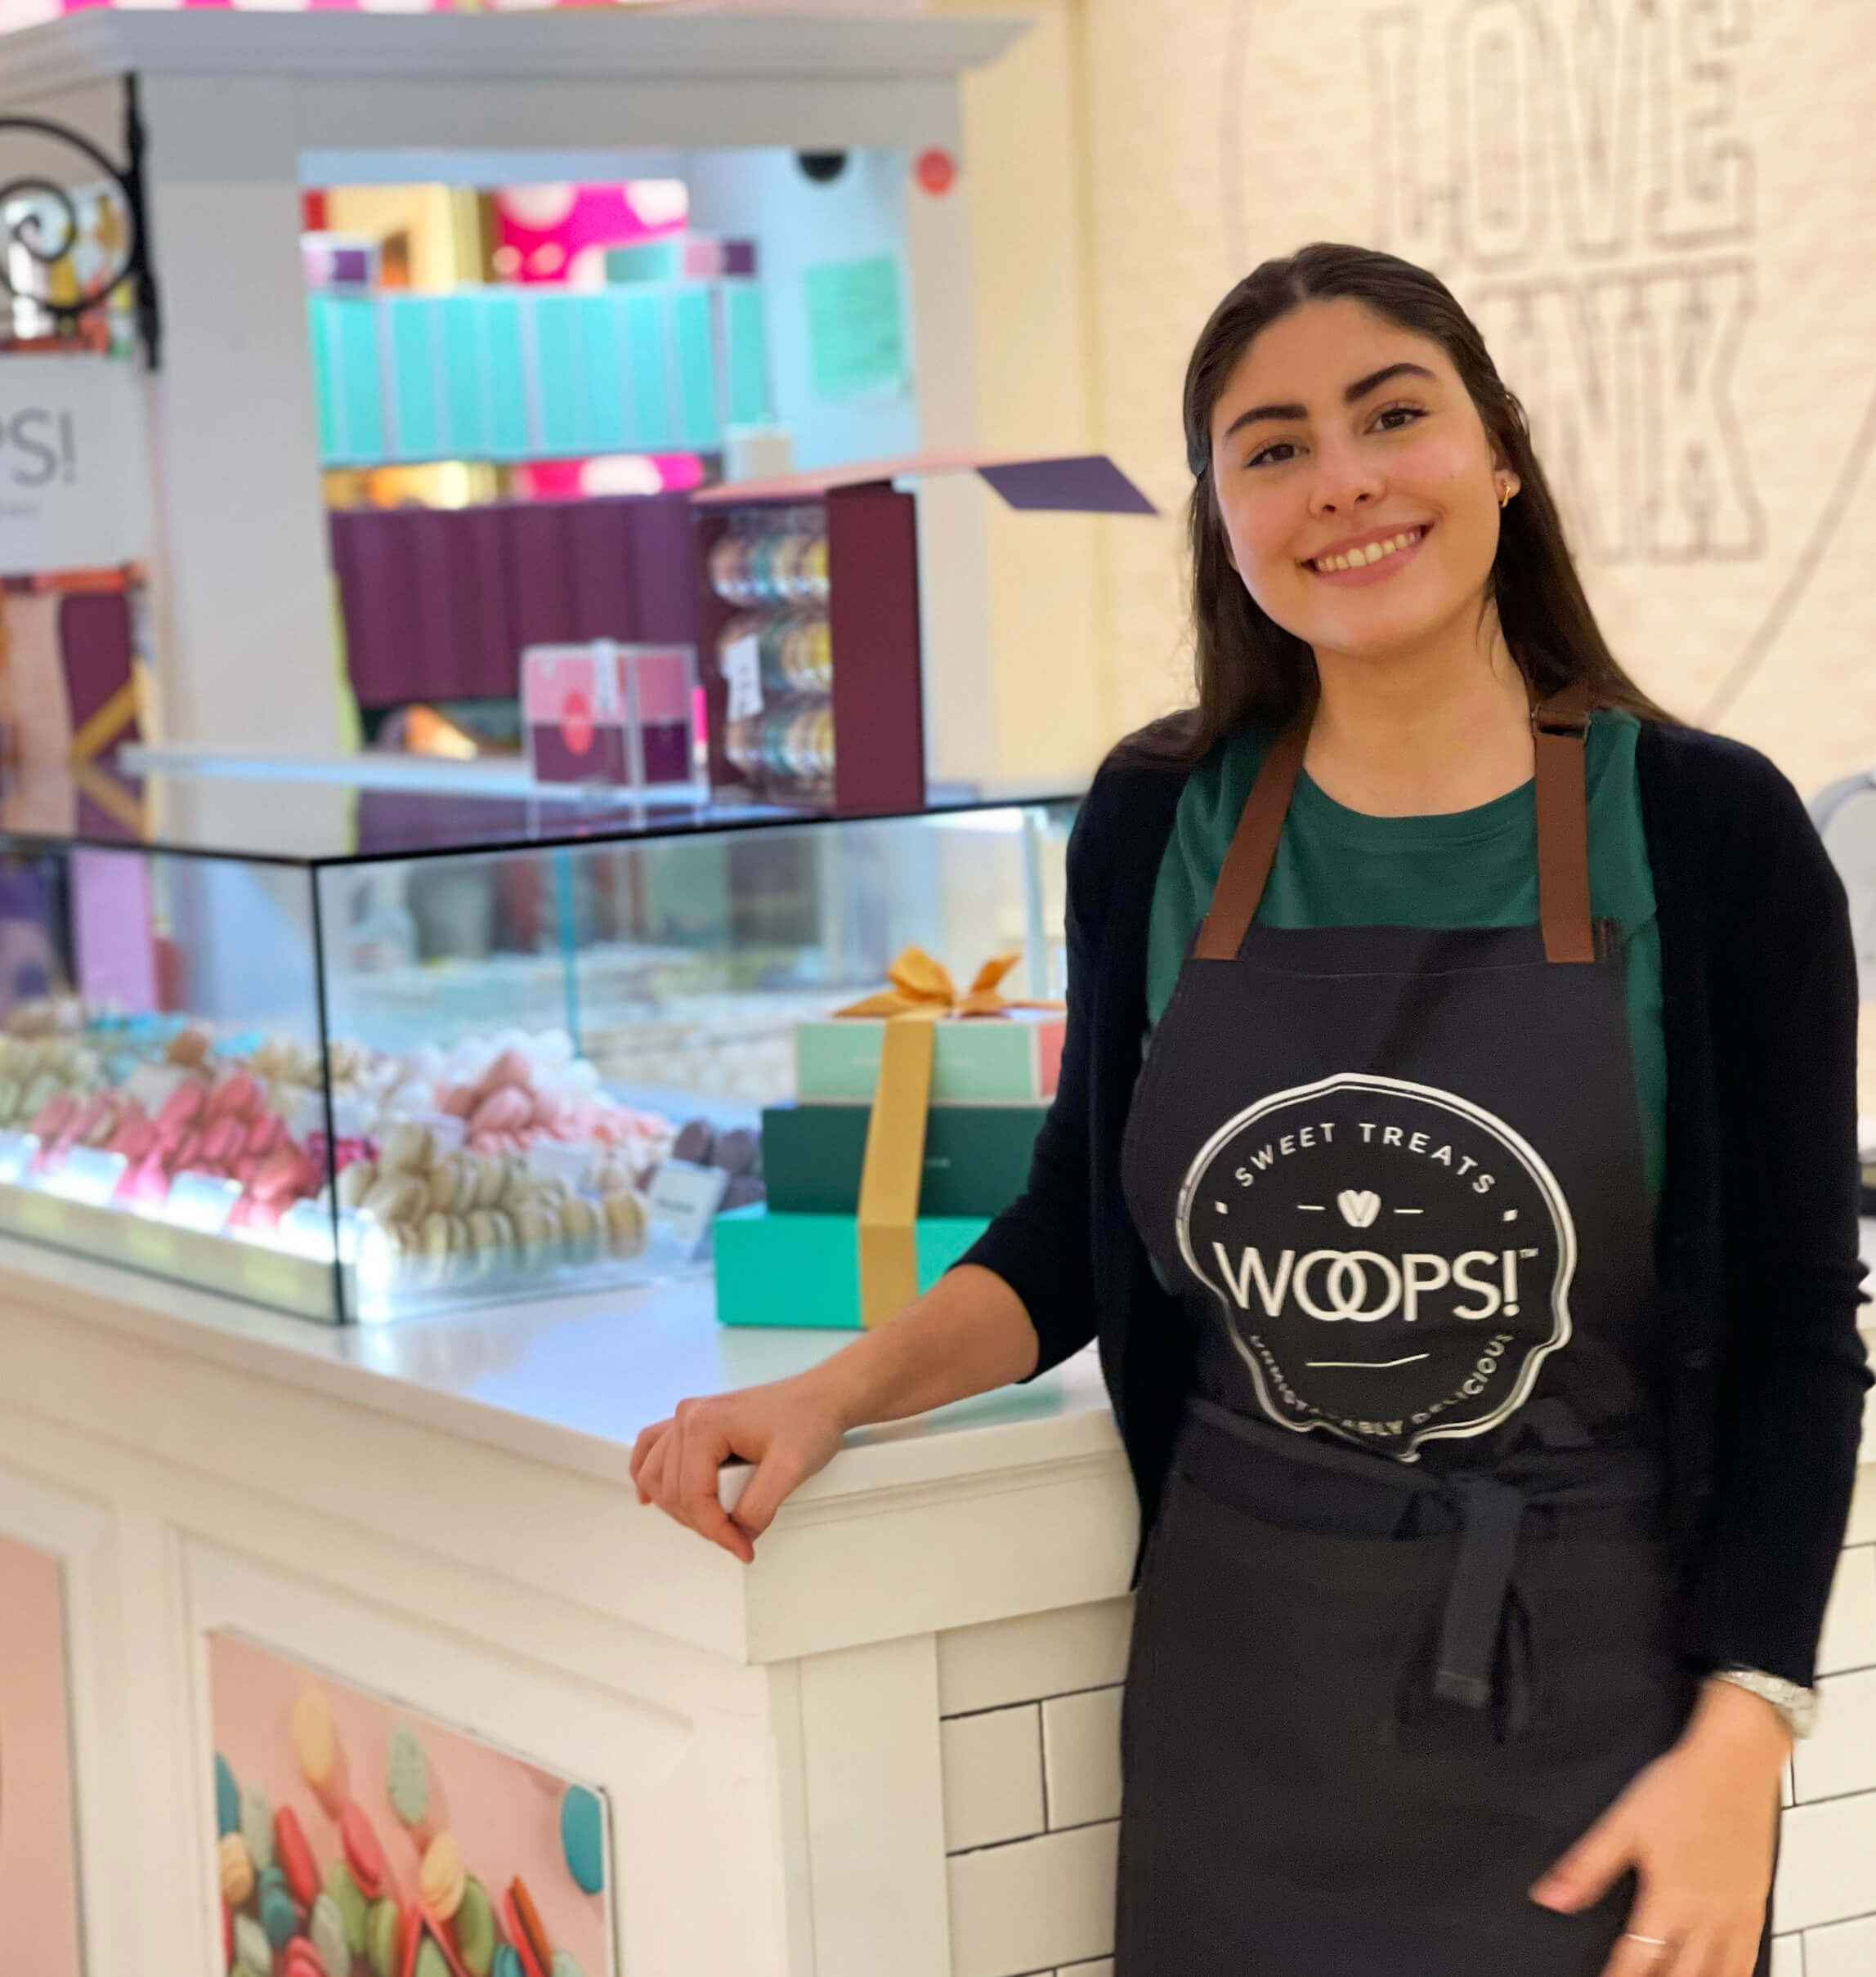 Owner of Woops! French Macaron Franchisee at the with a counter at the back